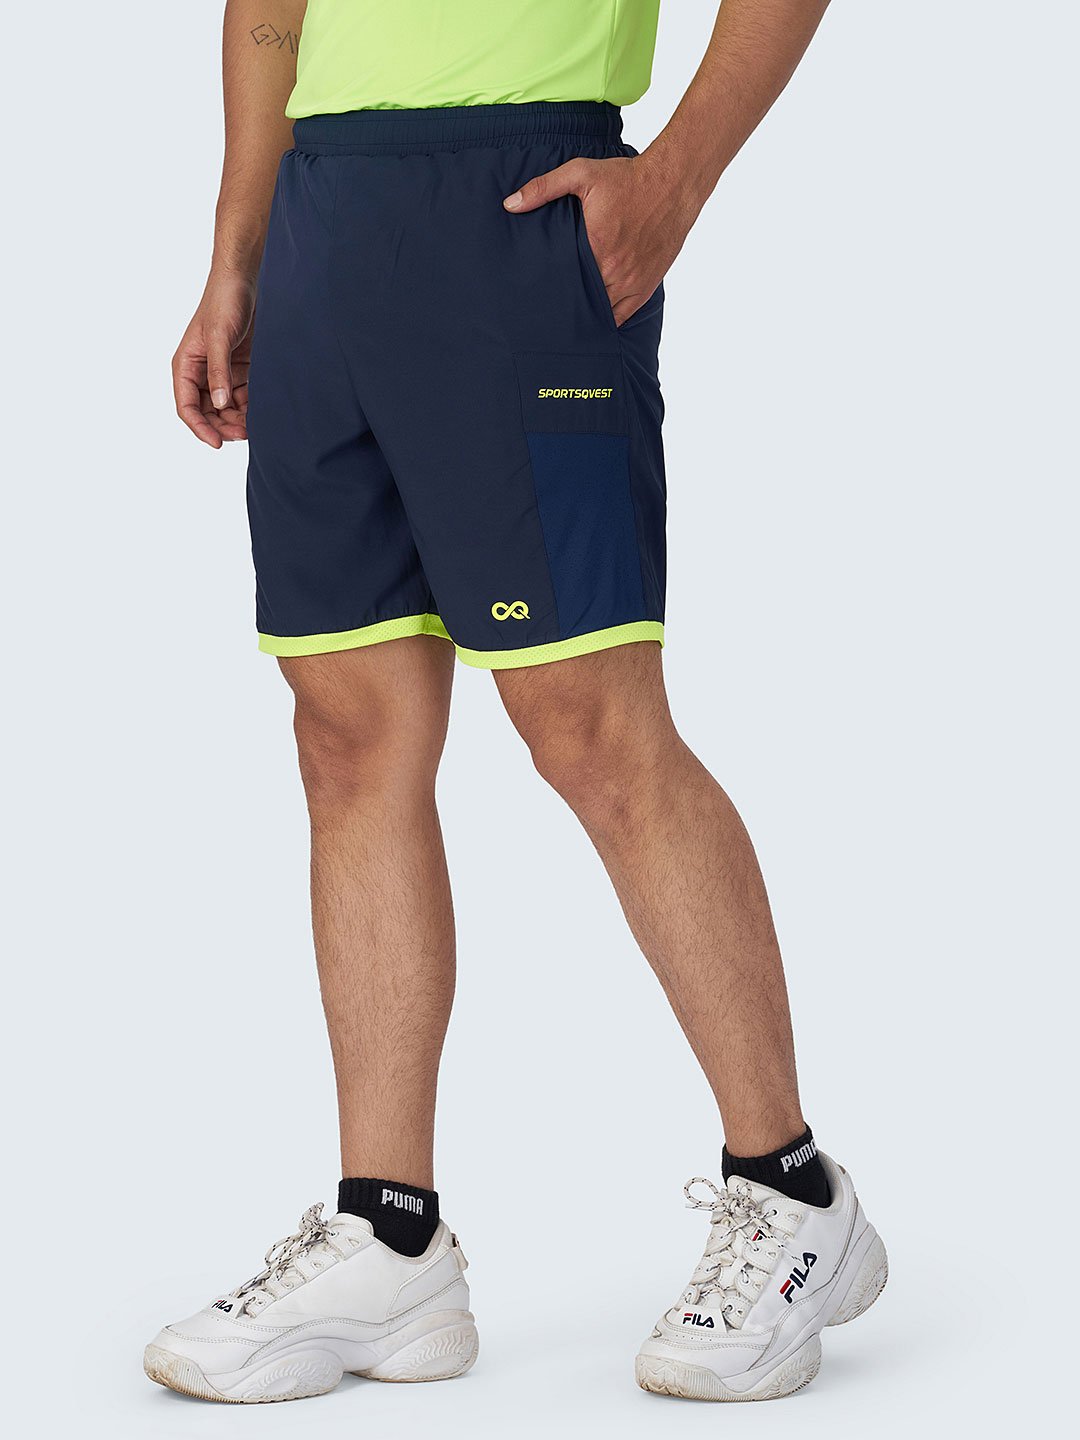 Men's Active Sports Shorts with Neon Piping: Navy Blue - Front